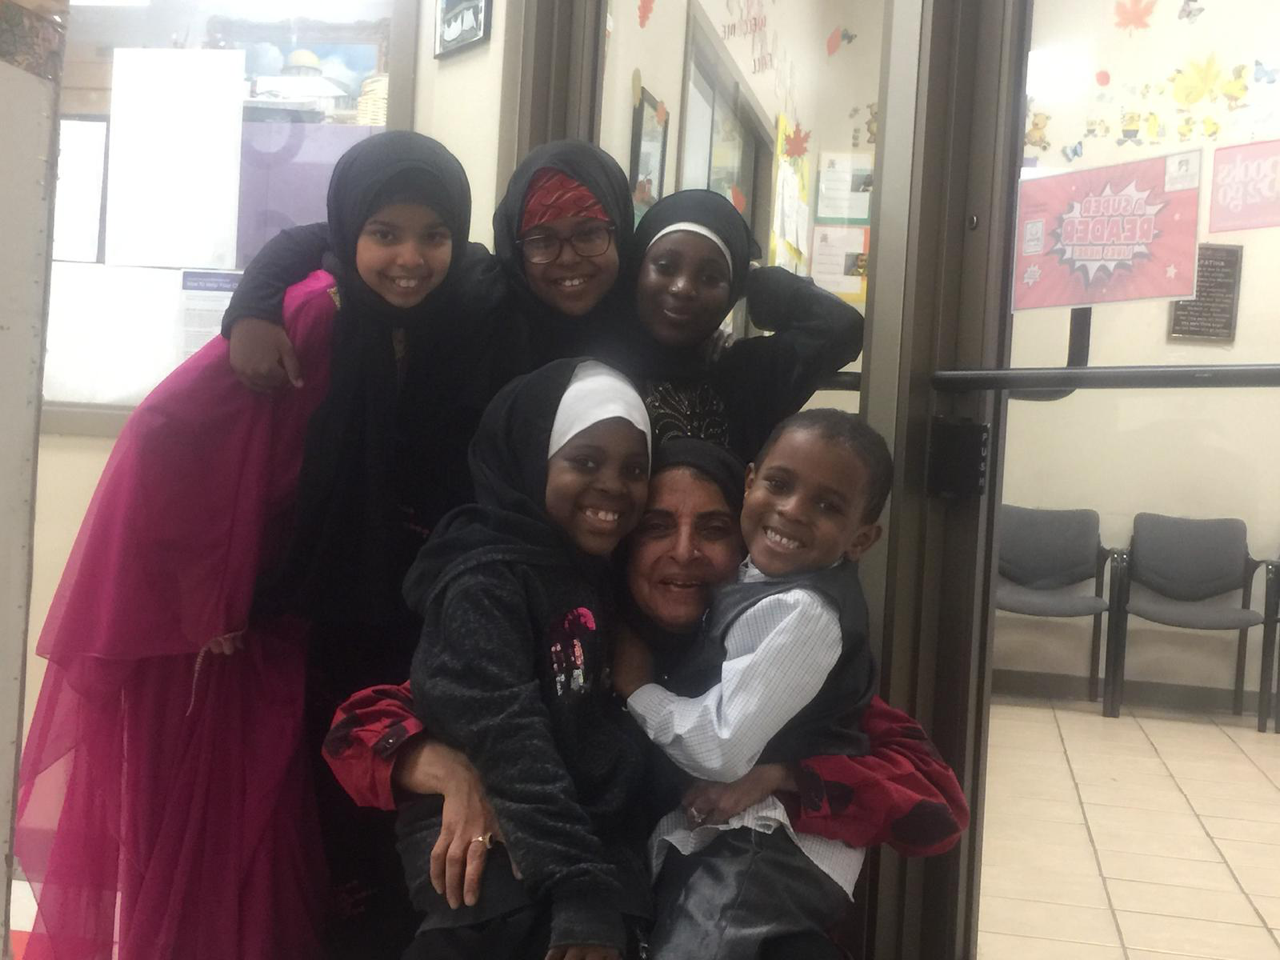 Rafat Arain with children she cares for at Crescent Learning Center in Milwaukee